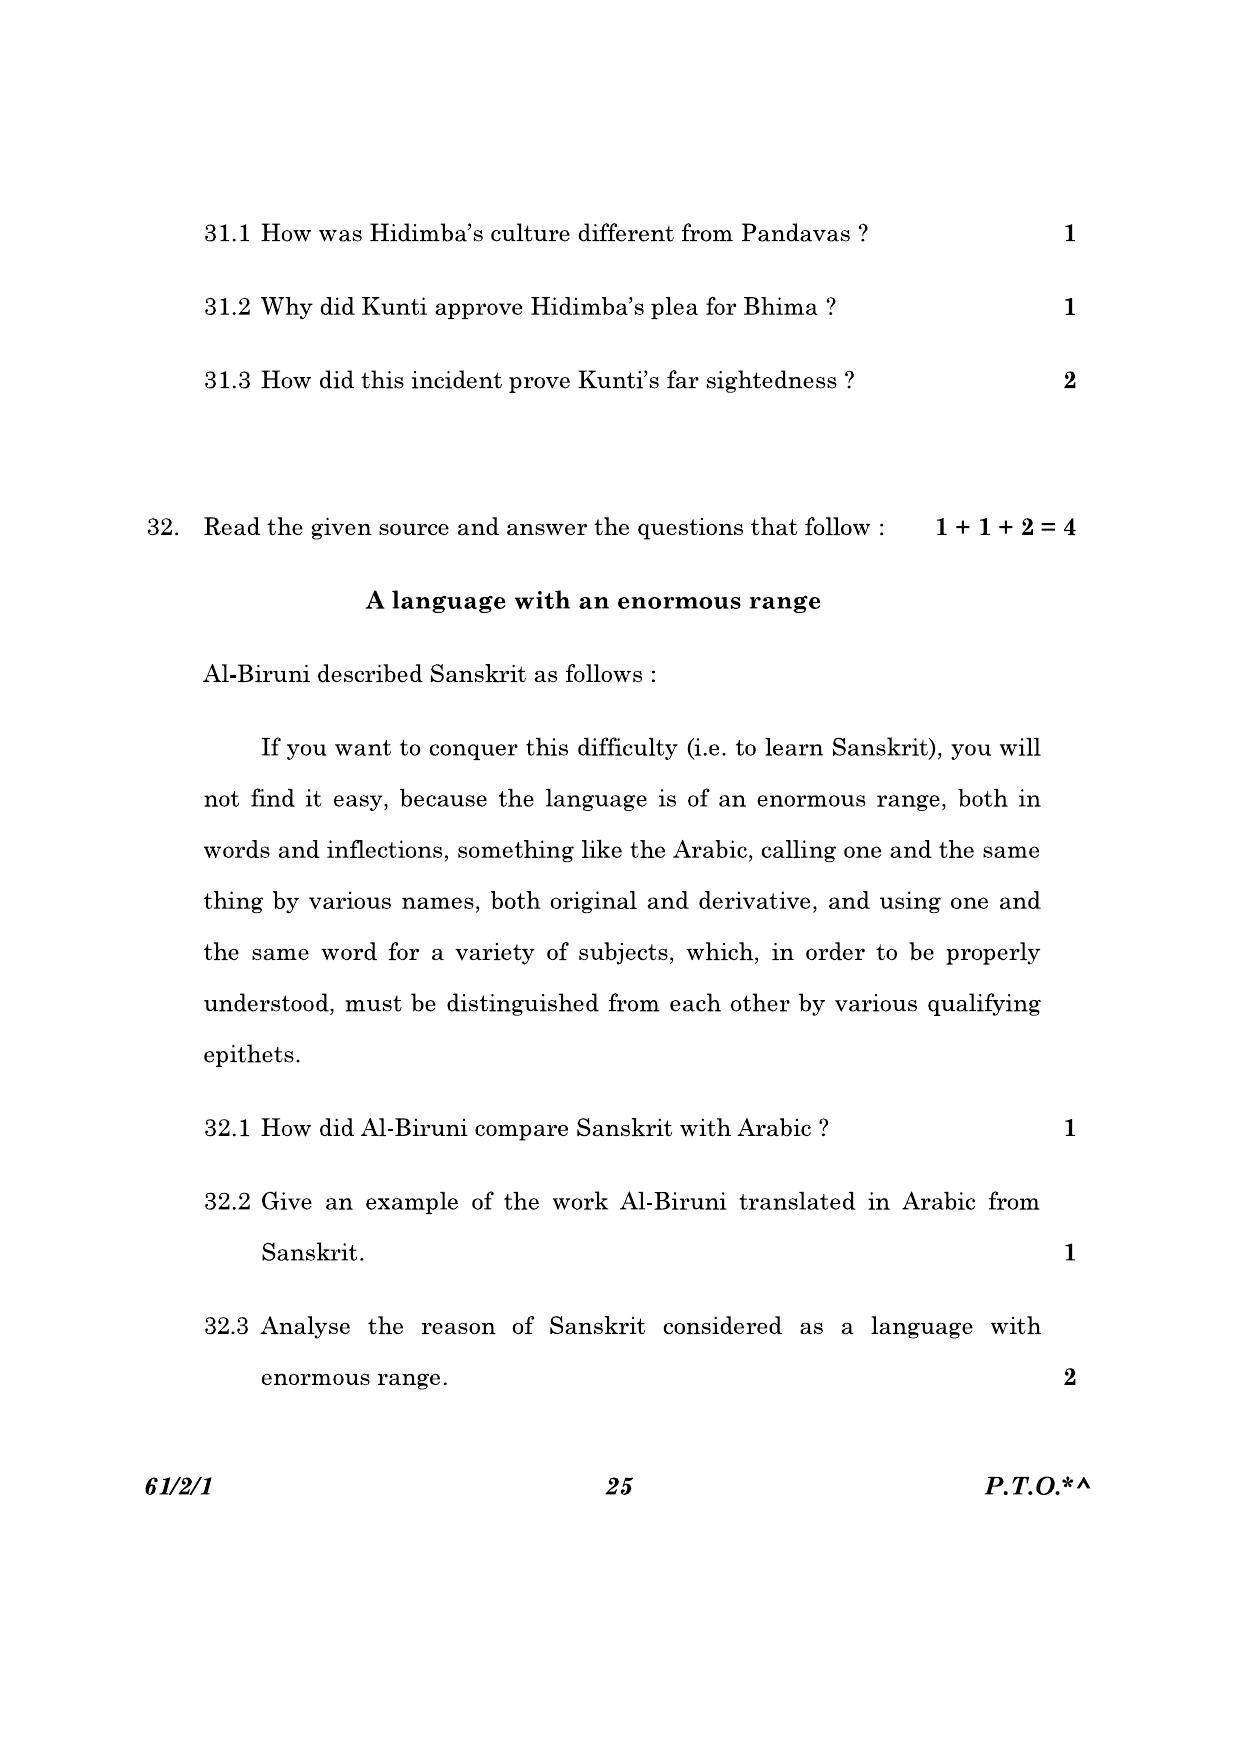 CBSE Class 12 61-2-1 History 2023 Question Paper - Page 25